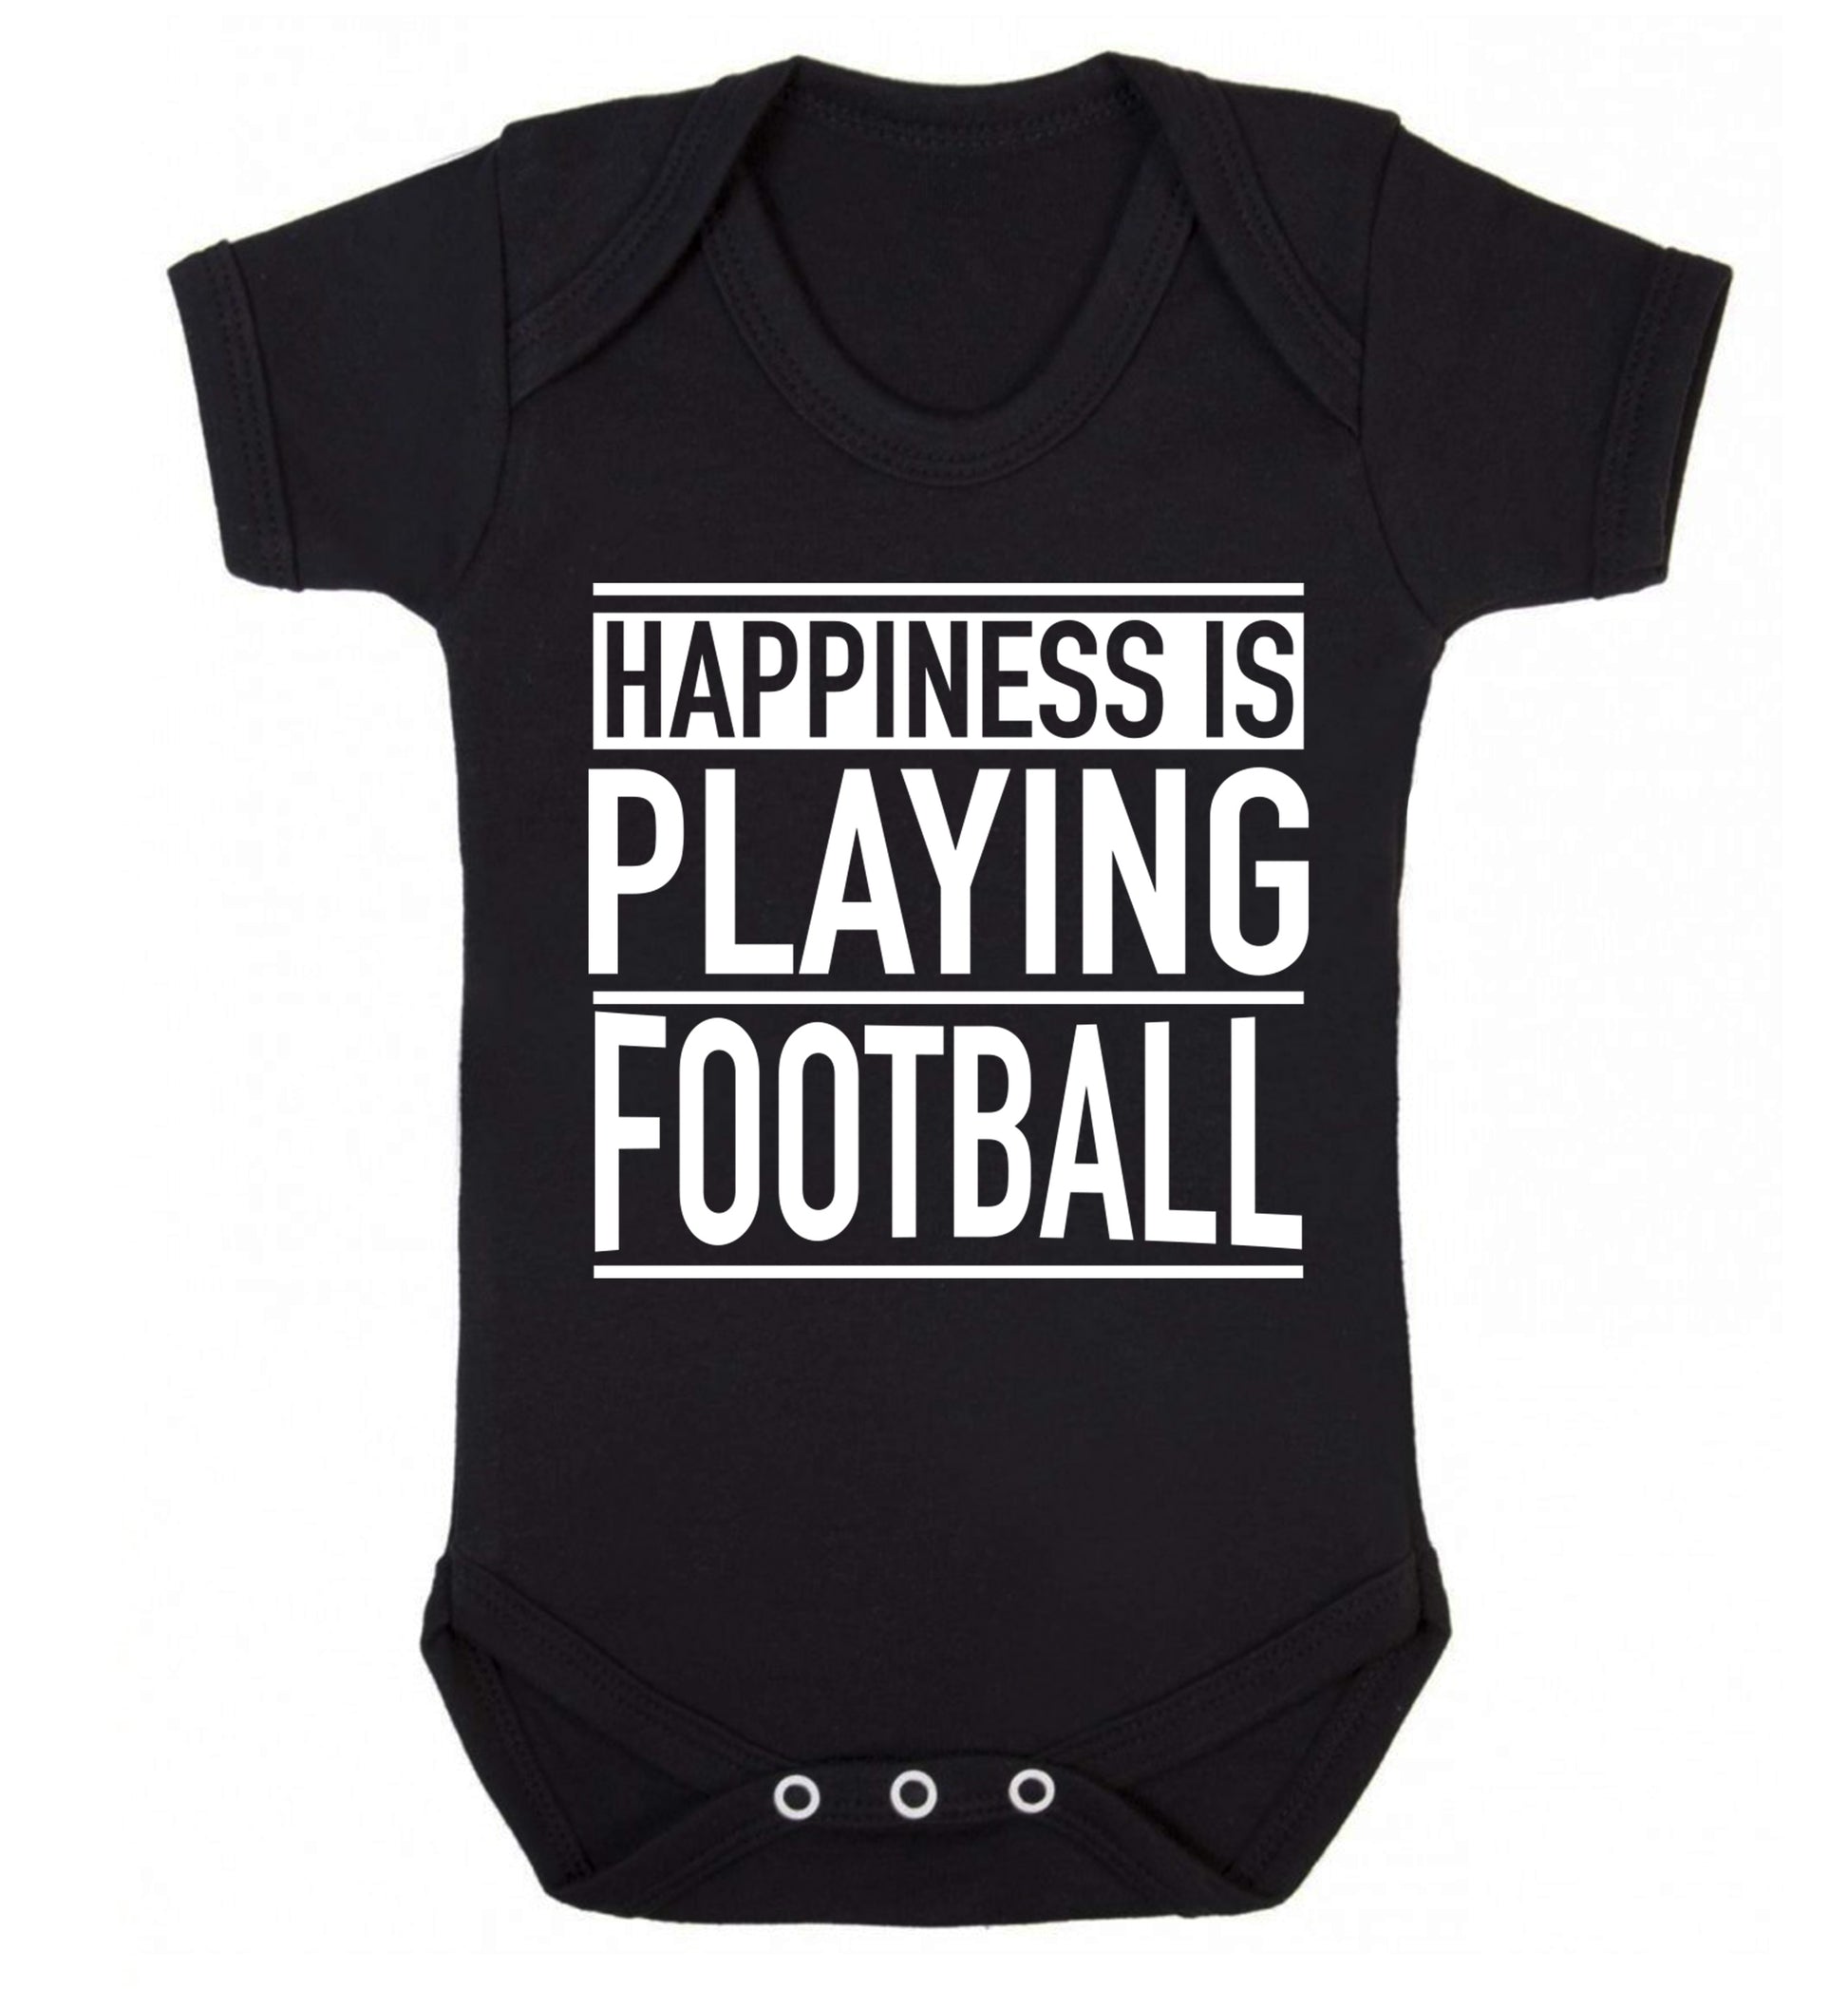 Happiness is playing football Baby Vest black 18-24 months